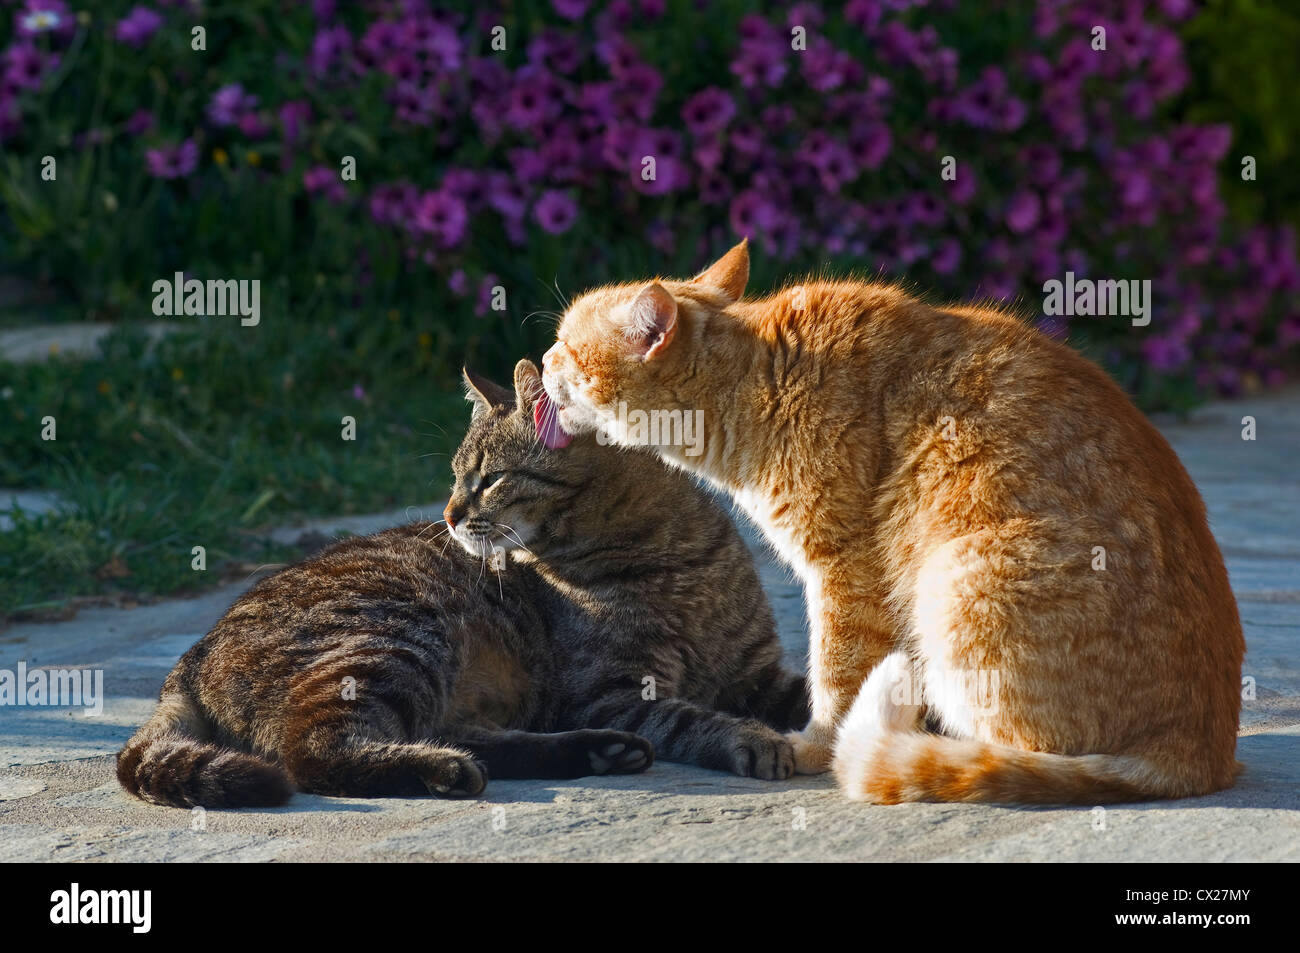 Two cats grooming each other Stock Photo